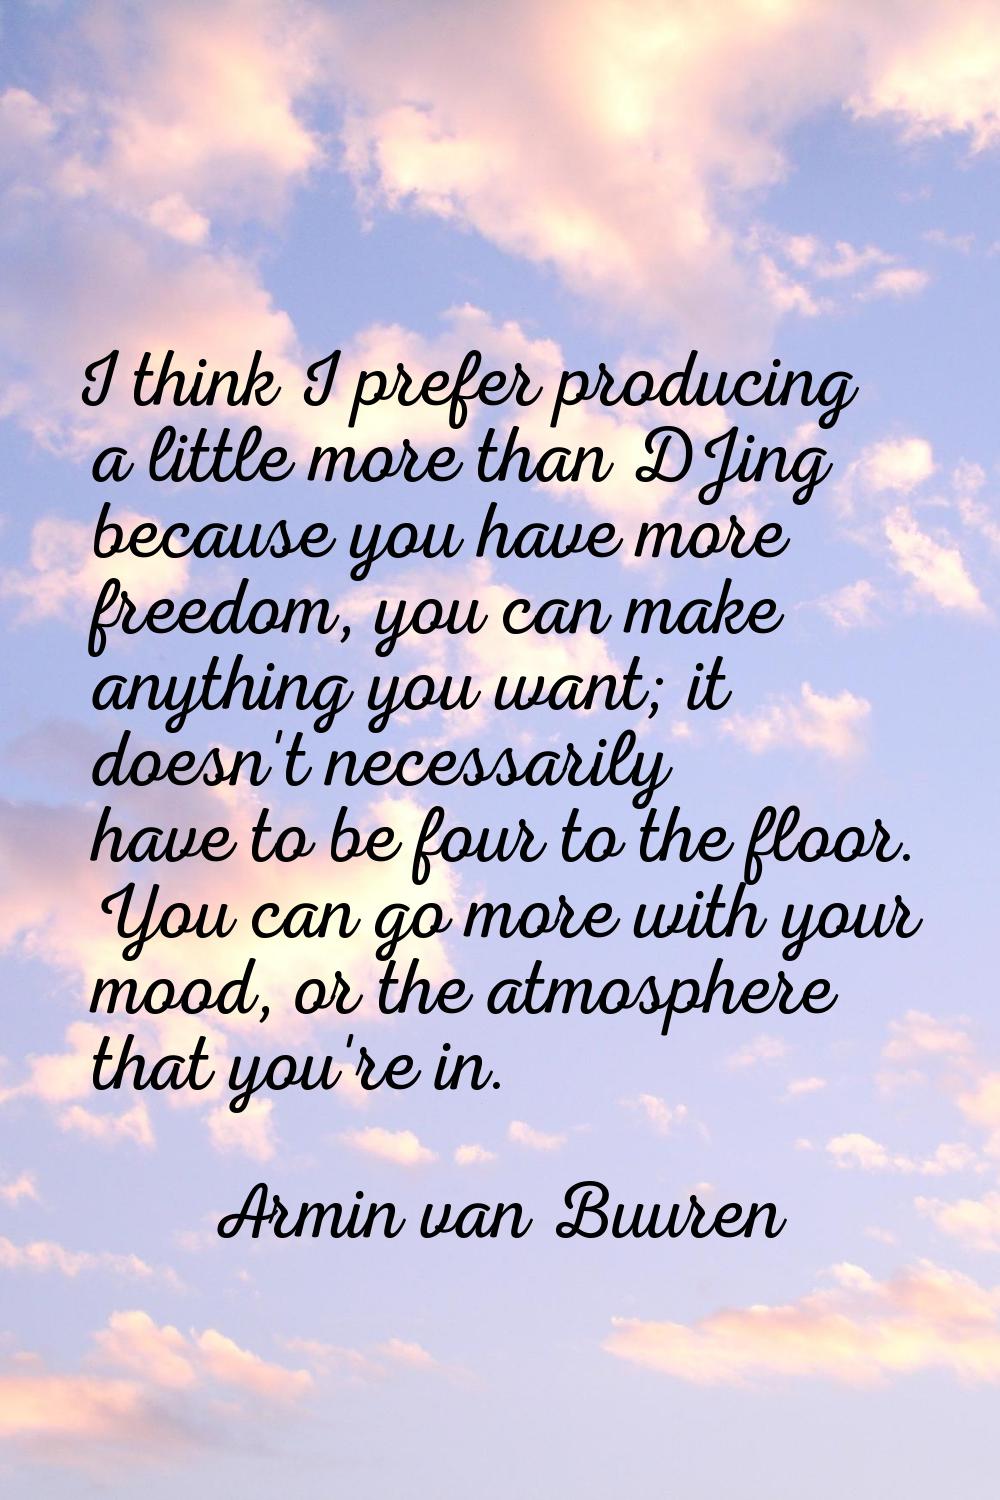 I think I prefer producing a little more than DJing because you have more freedom, you can make any